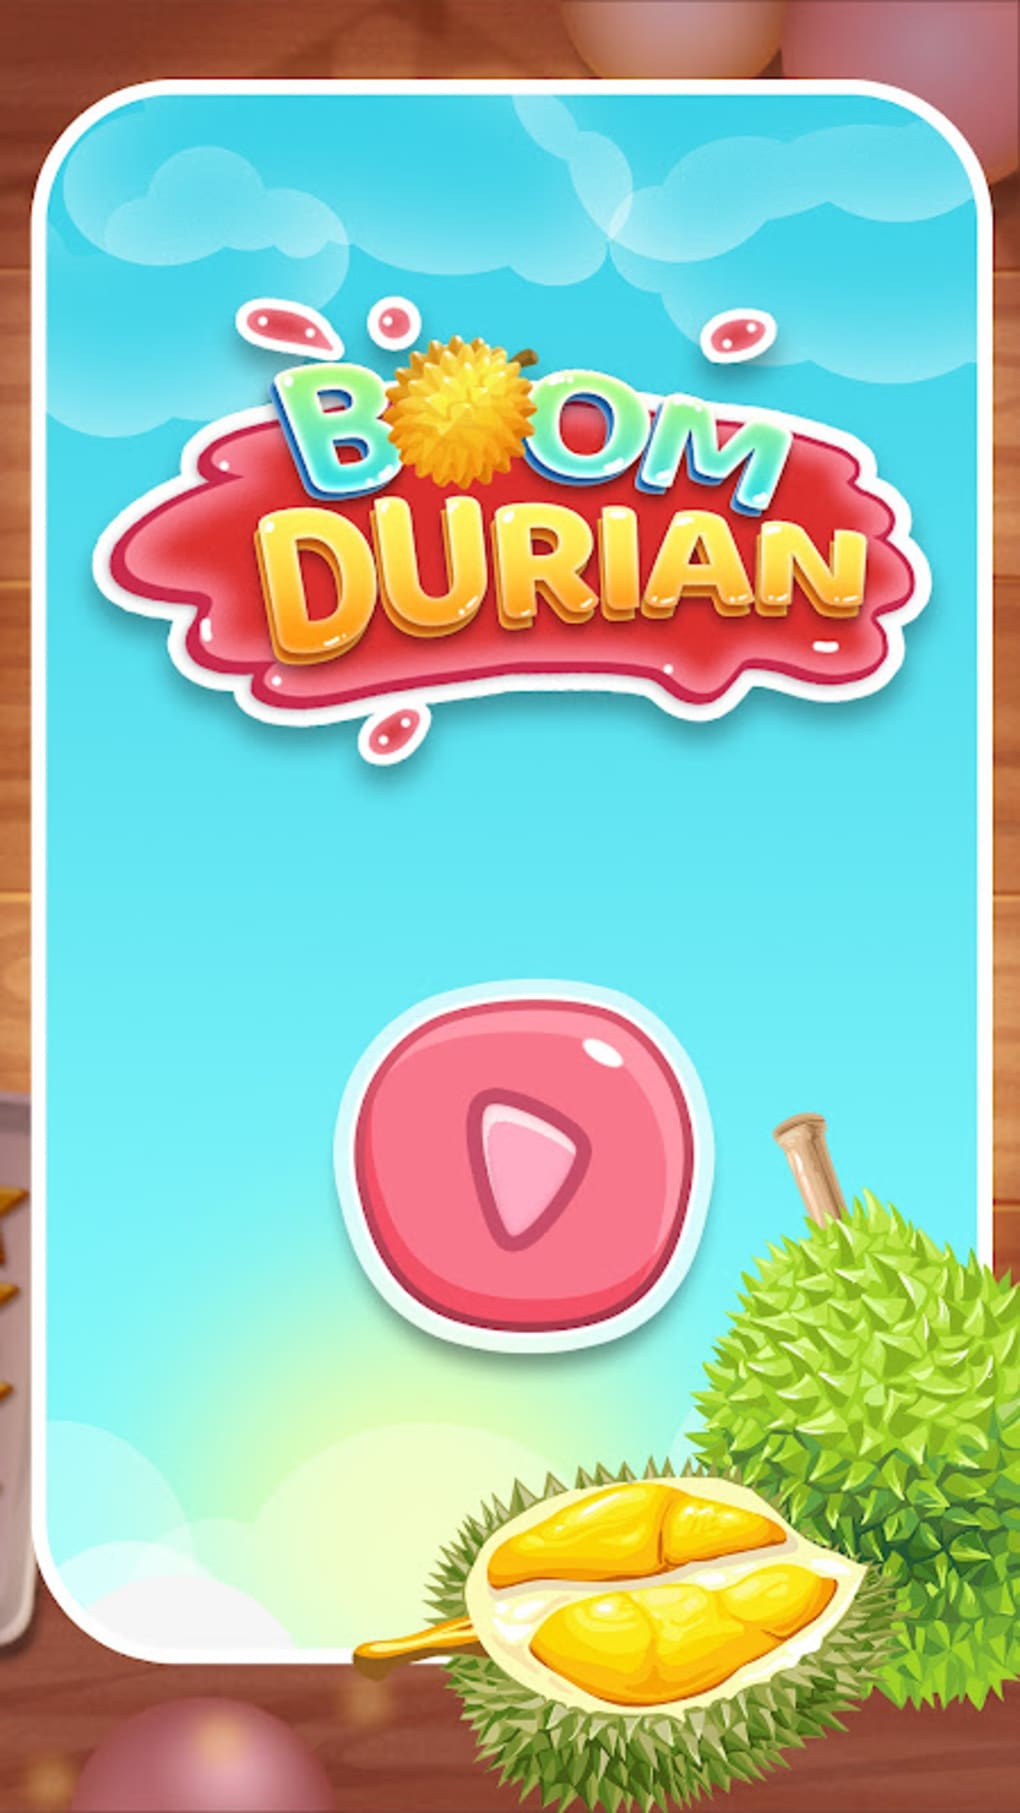 Crazy Fruits 2048 - Apps on Google Play